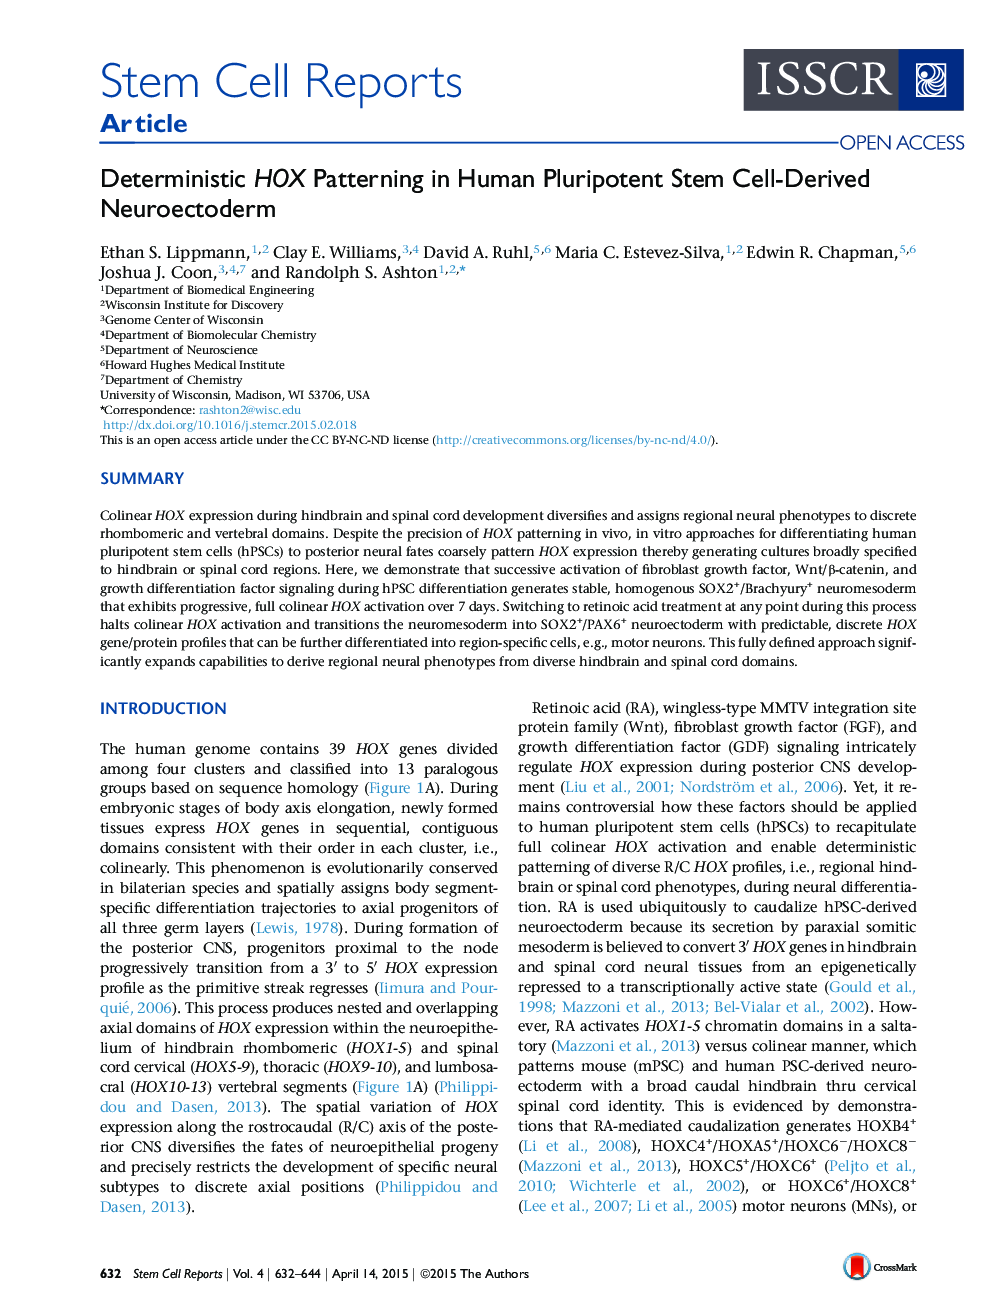 Deterministic HOX Patterning in Human Pluripotent Stem Cell-Derived Neuroectoderm 